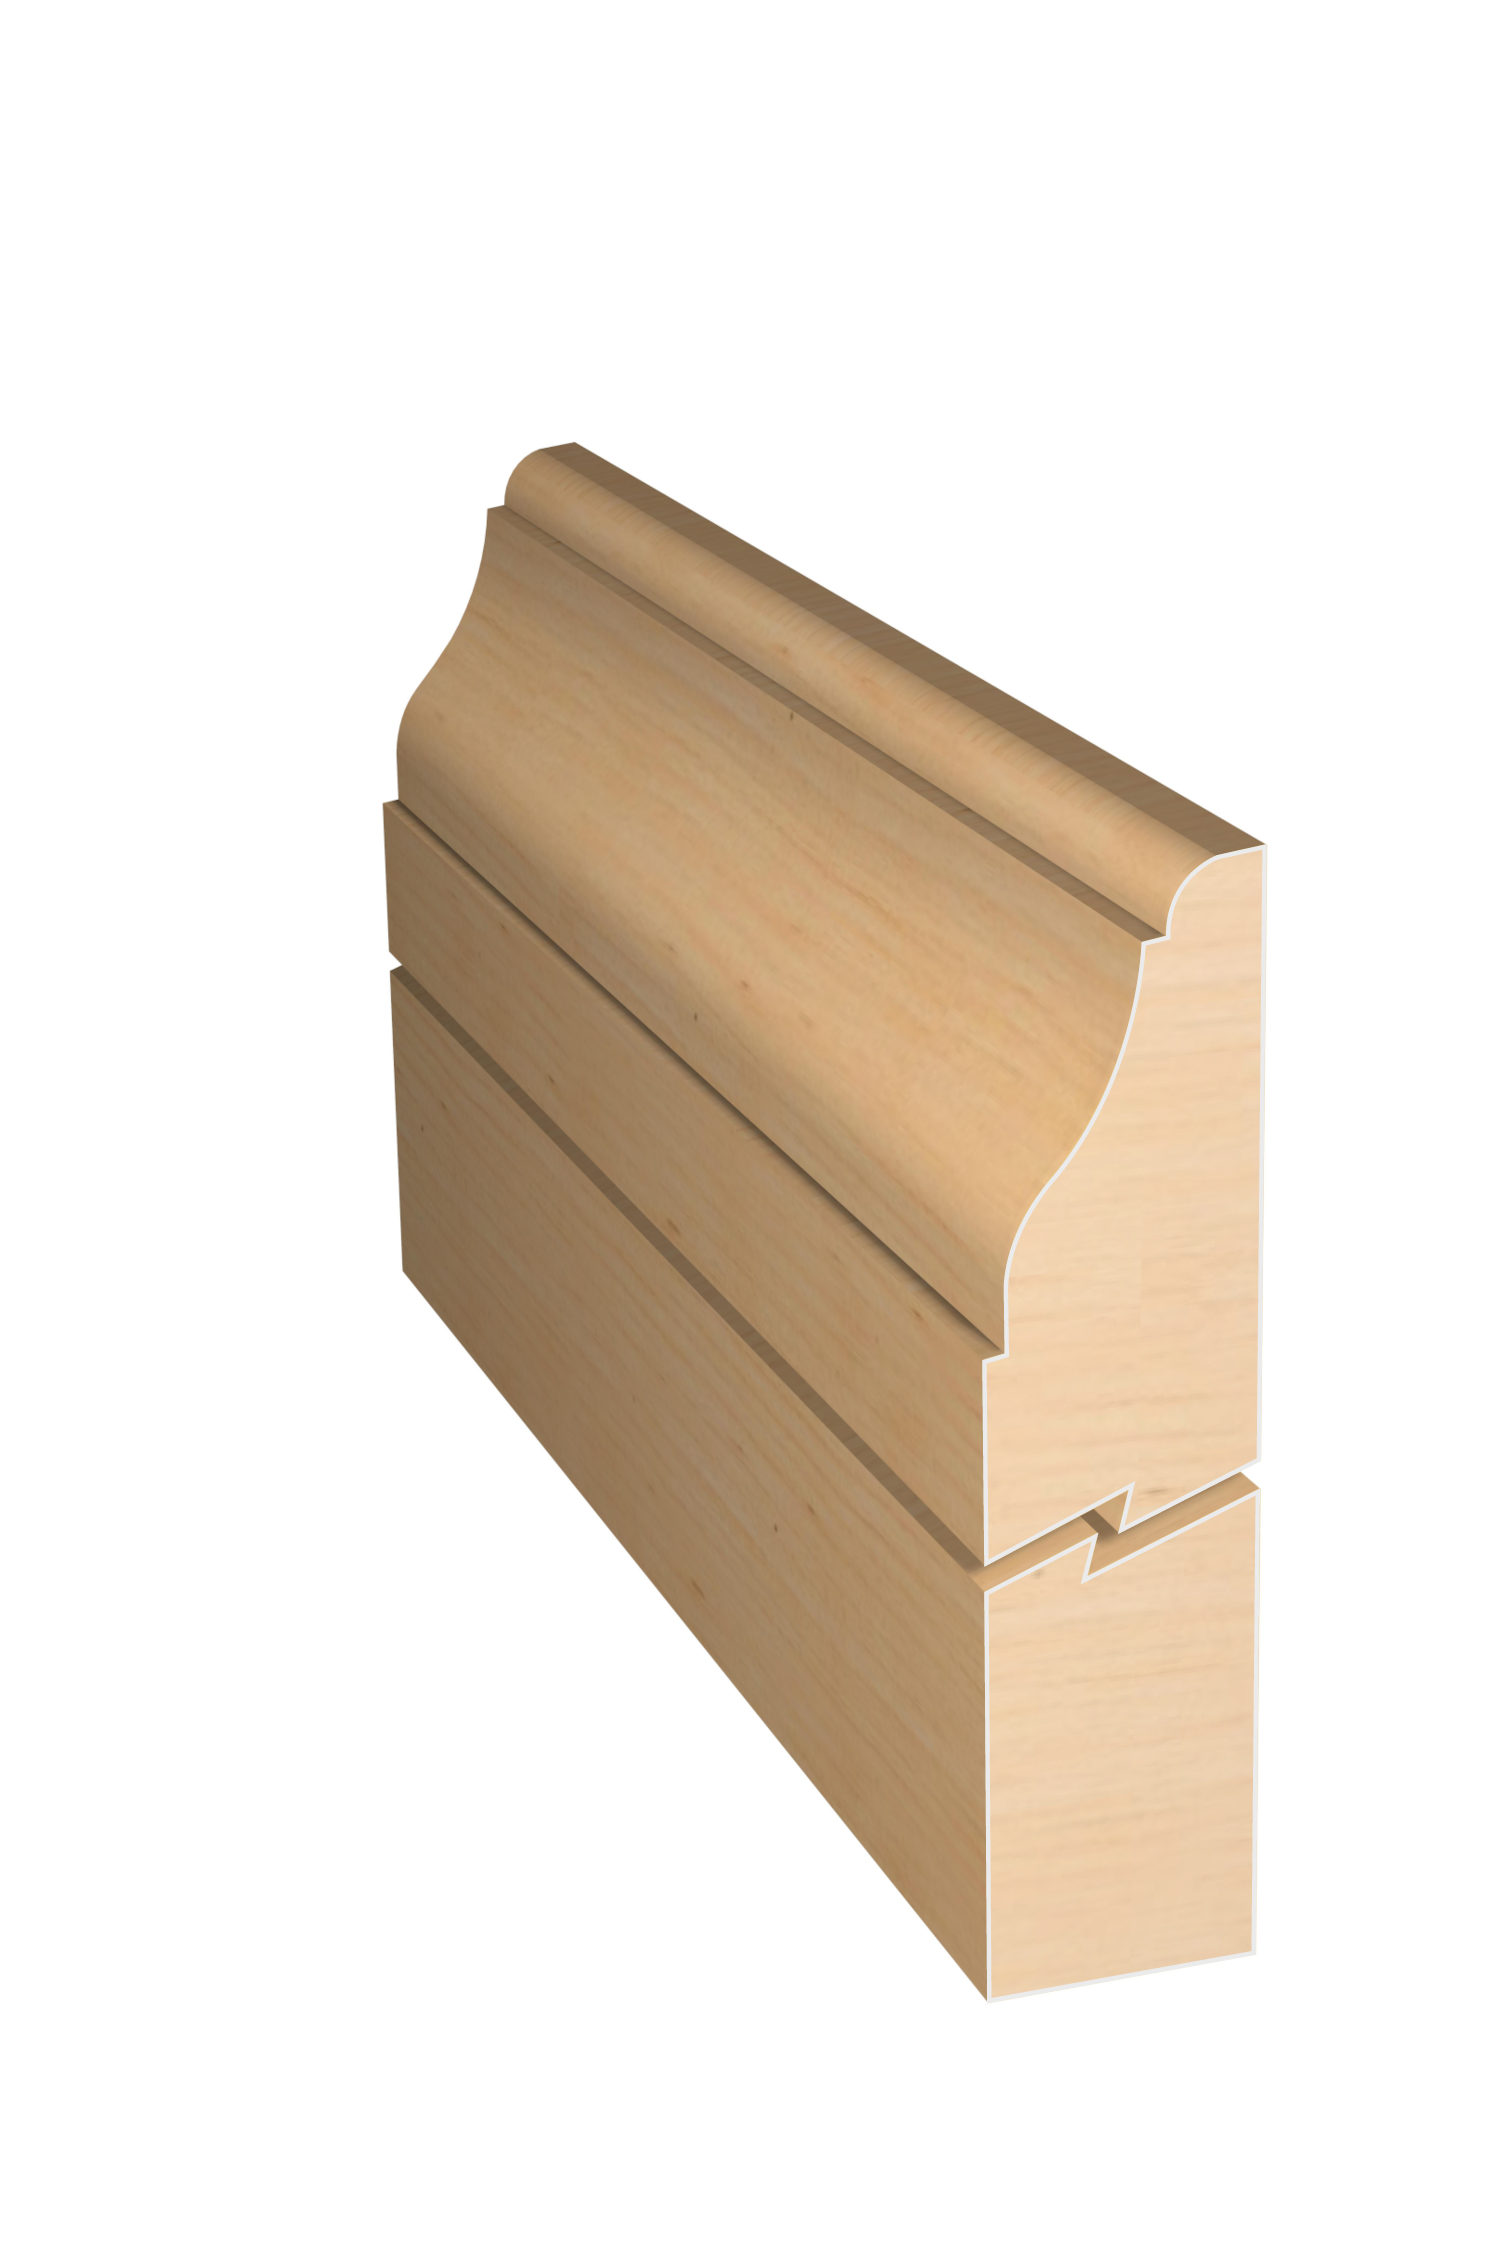 Three dimensional rendering of custom edge profile wood molding SKPL74 made by Public Lumber Company in Detroit.